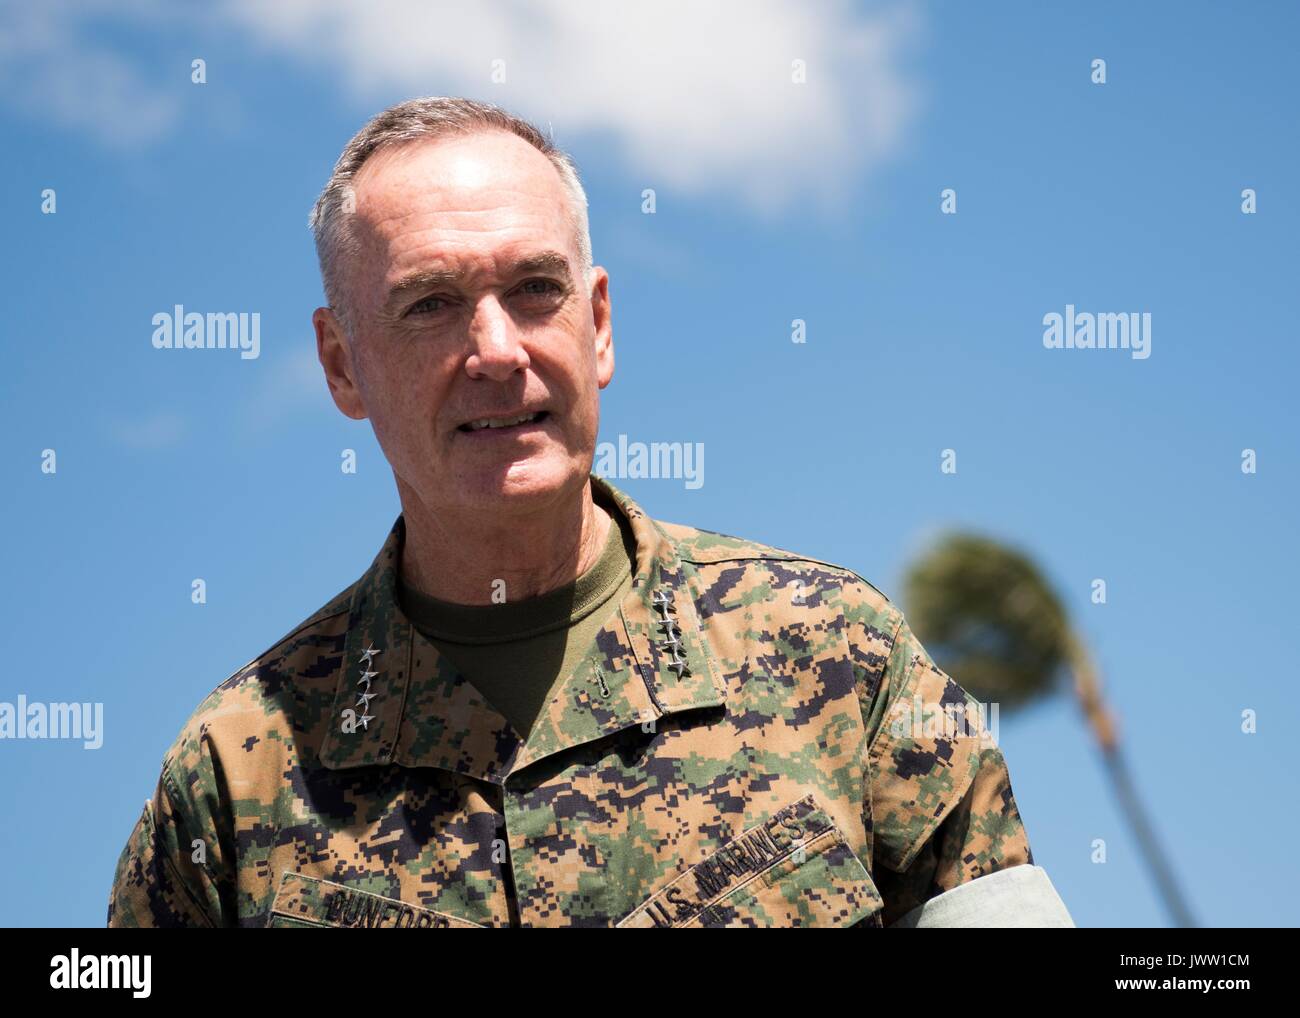 U.S. Chairman of the Joint Chiefs Gen. Joseph Dunford before boarding his aircraft at PACOM Headquarters Joint Base Pearl Harbor-Hickam August 12, 2017 in Honolulu, Hawaii. Dunford is meeting military leaders in the Asia-Pacific region as tensions rise with North Korea over nuclear and ballistic missiles tests. Stock Photo